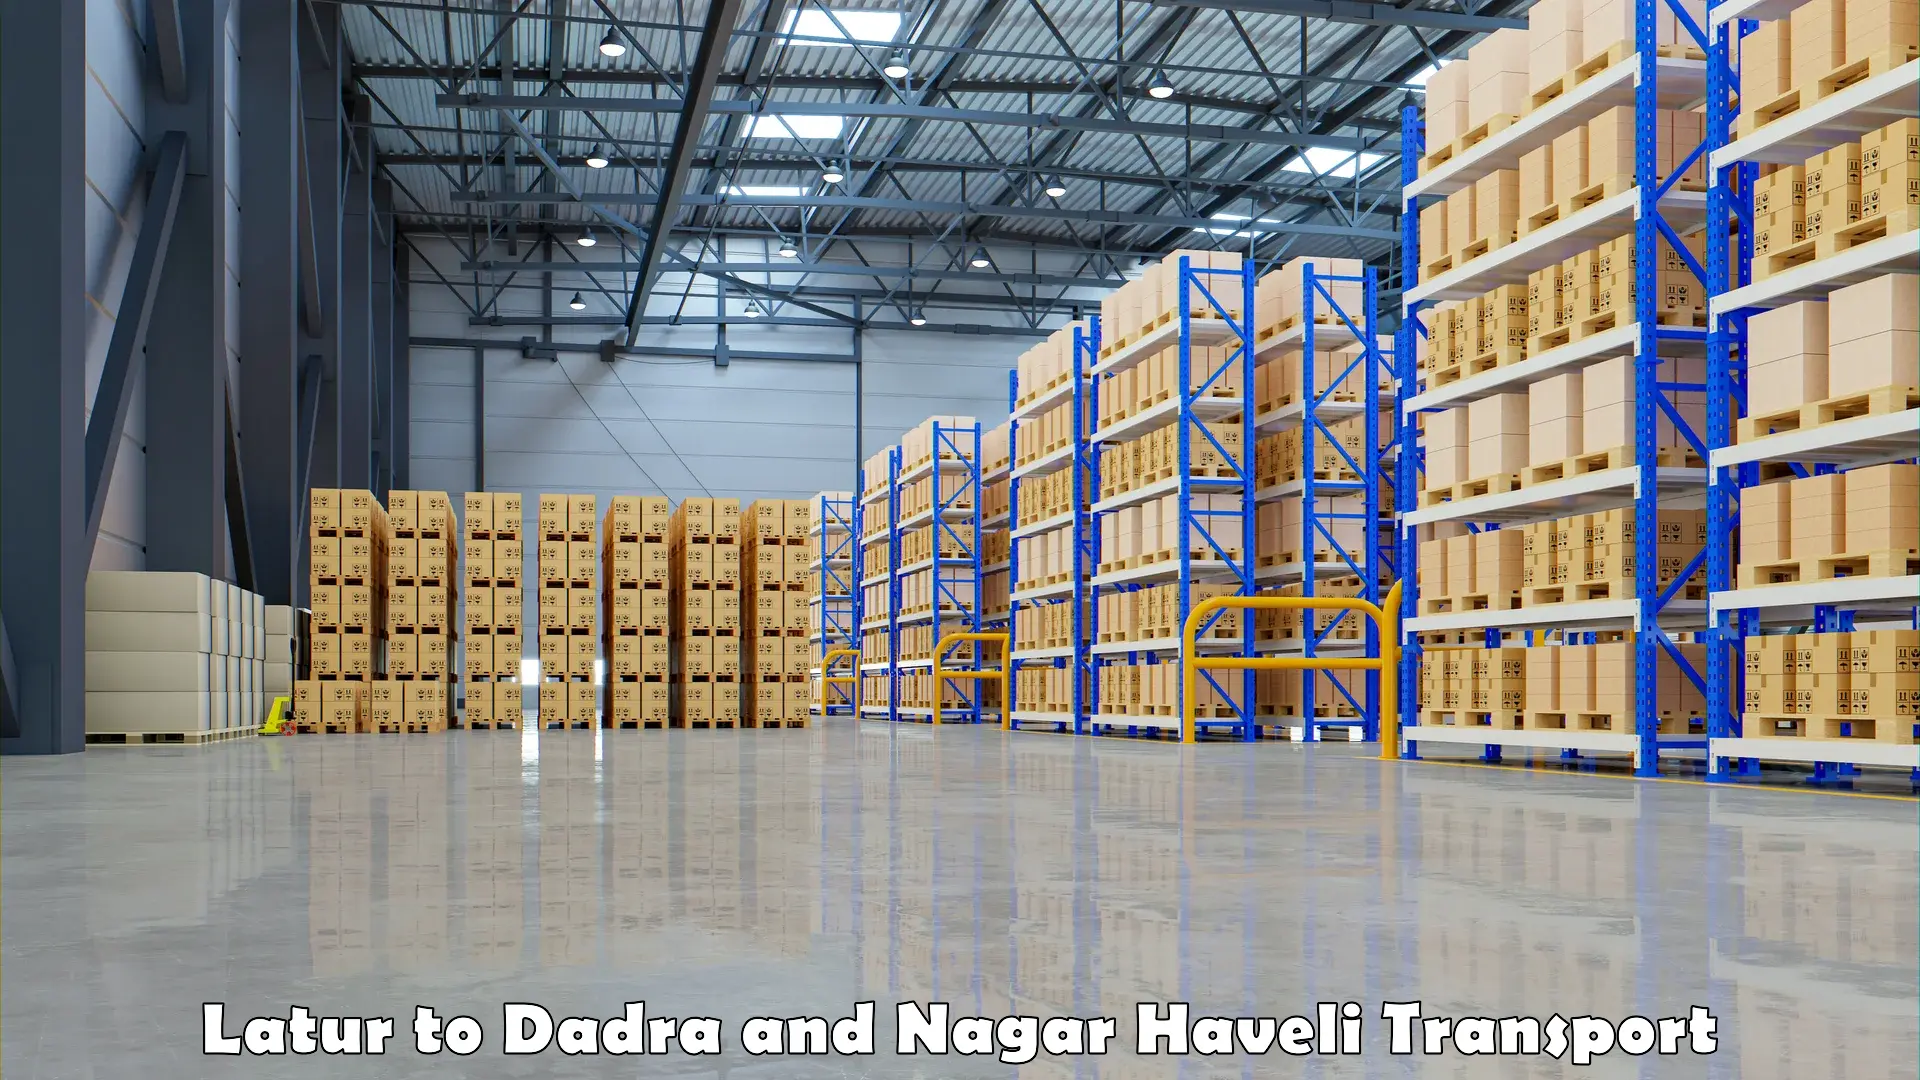 Commercial transport service Latur to Dadra and Nagar Haveli